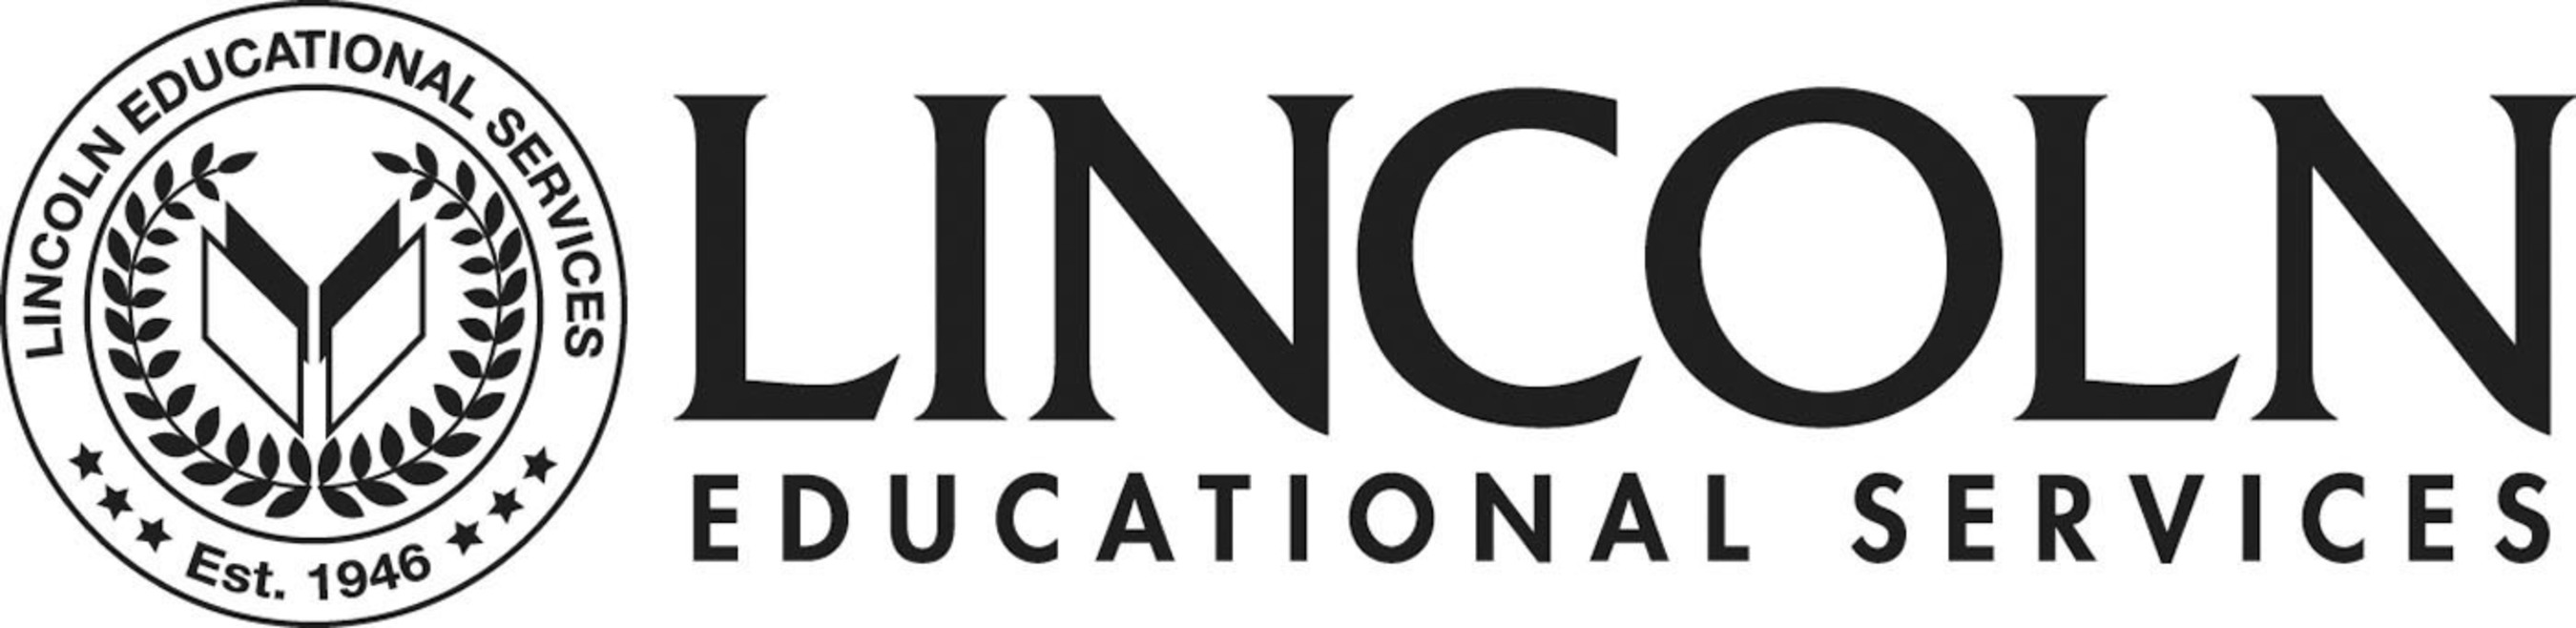 Lincoln Educational Services Corporation.